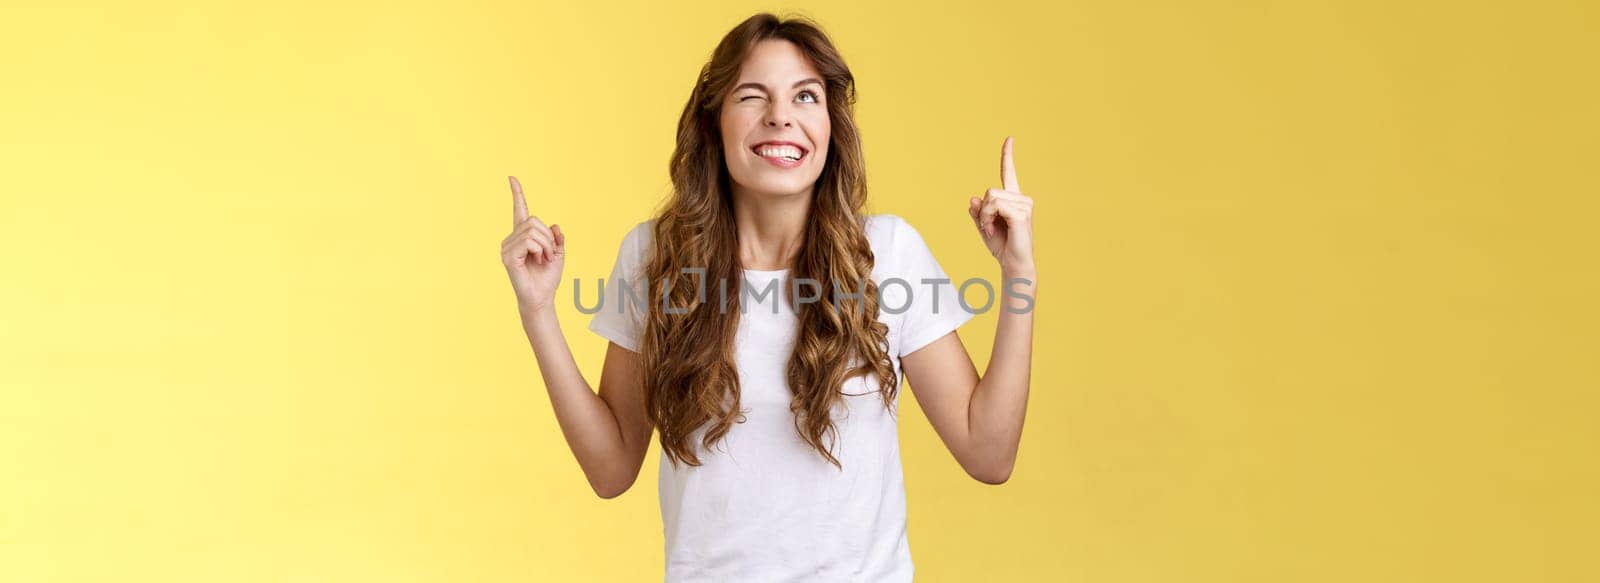 Cheeky confident positive attractive female optimistic joyful vibe smiling toothy wink grinning look up sassy pointing top making deal god hinting making cunning mood stand yellow background. Lifestyle.